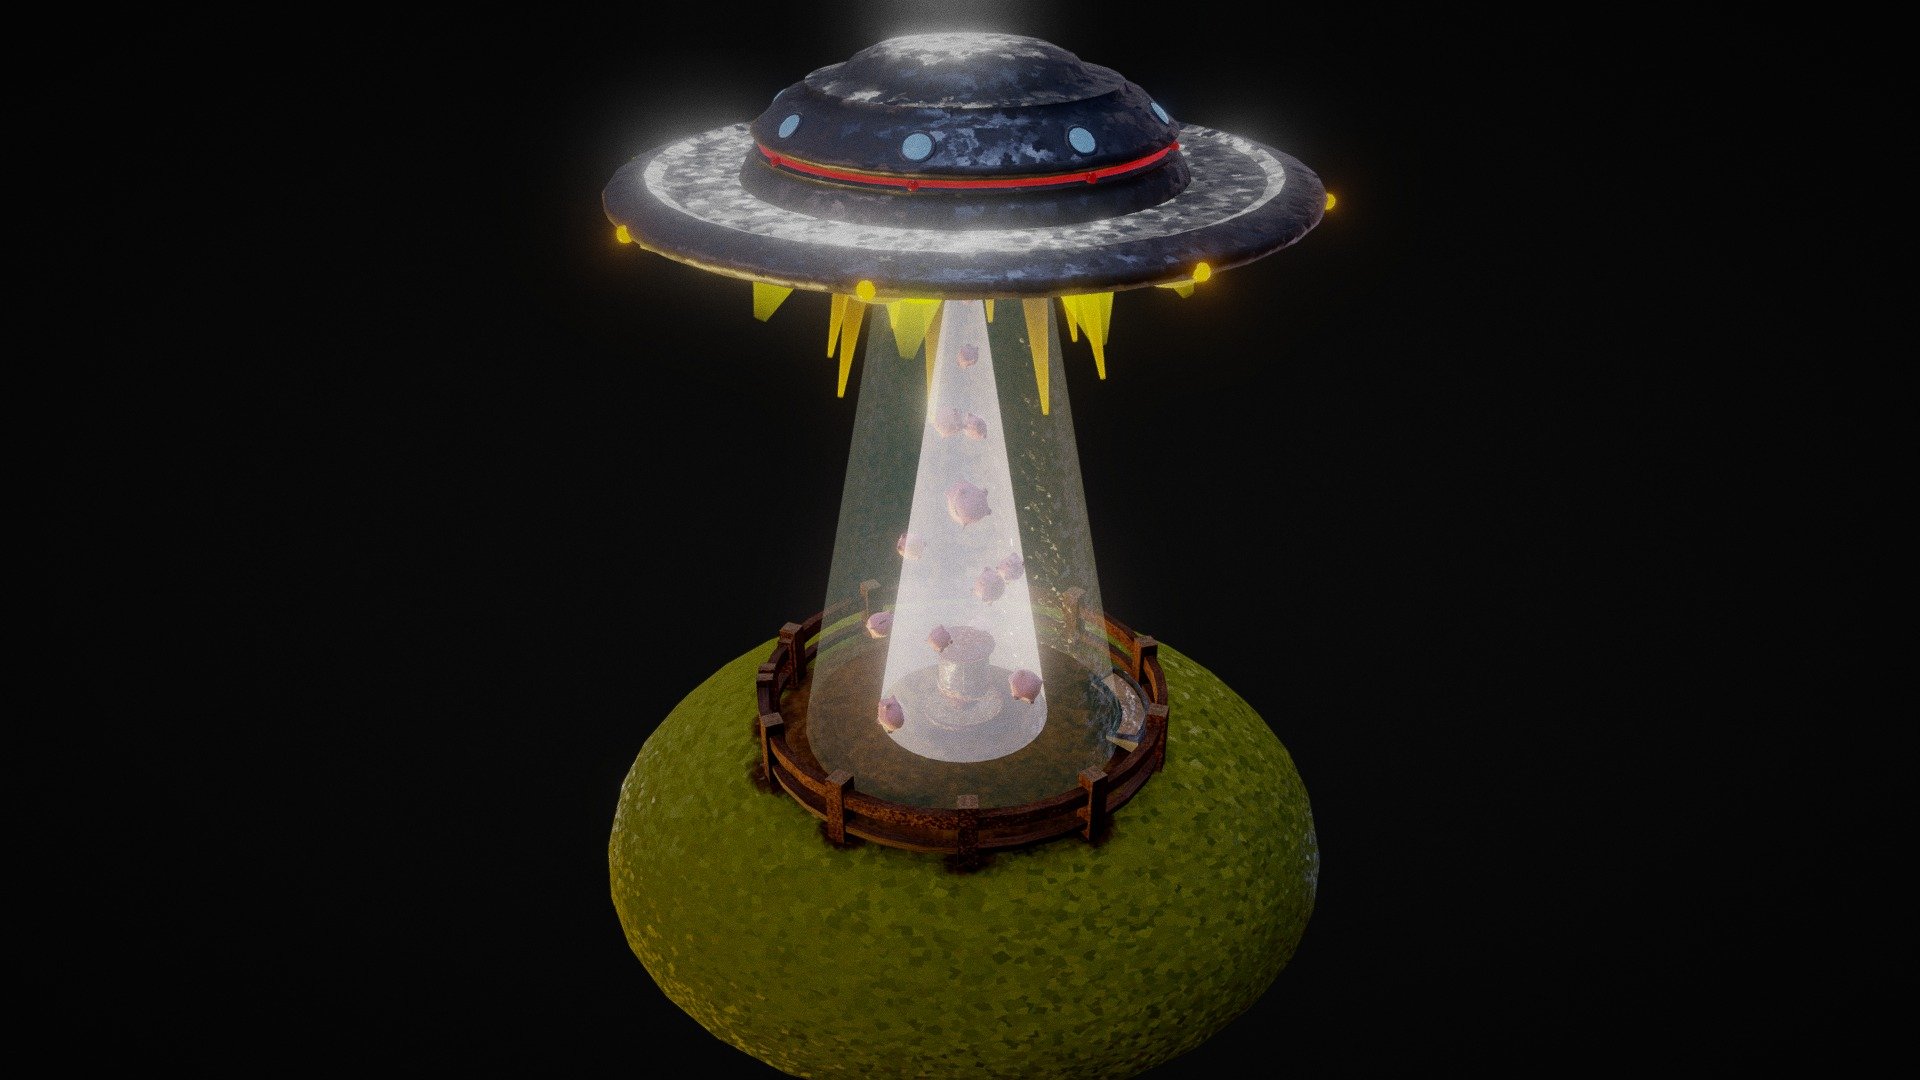 UFO Abduction Pigs made in 3Ds Max and Substance Painter - UFO Abduction Pigs - Download Free 3D model by Korax254 (@Tonifo254) 3d model